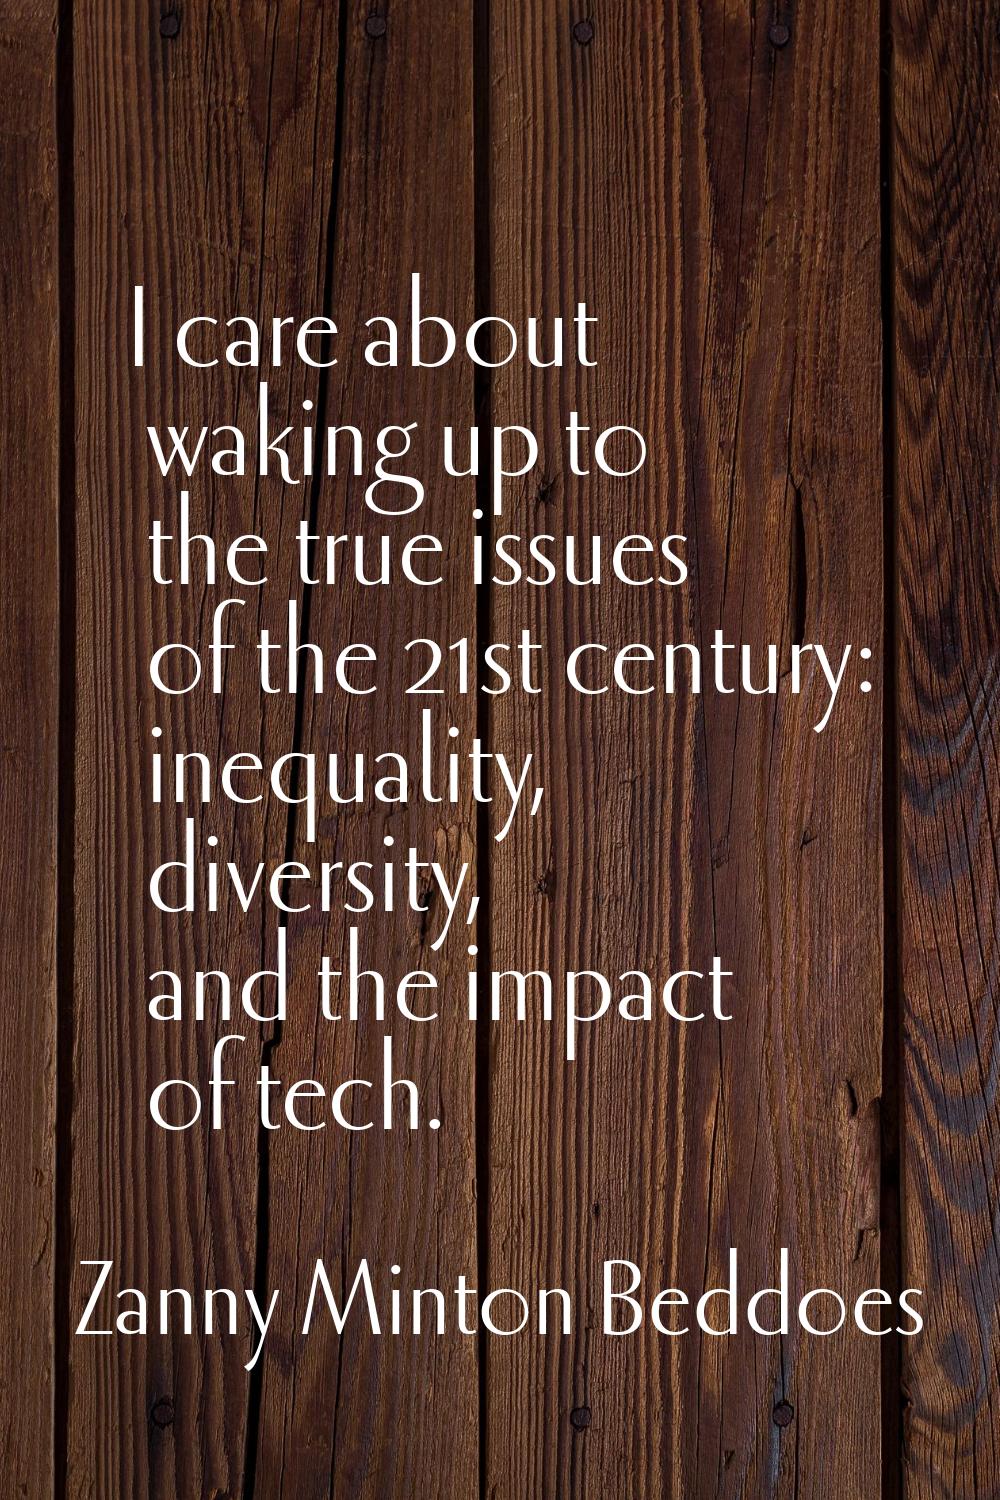 I care about waking up to the true issues of the 21st century: inequality, diversity, and the impac